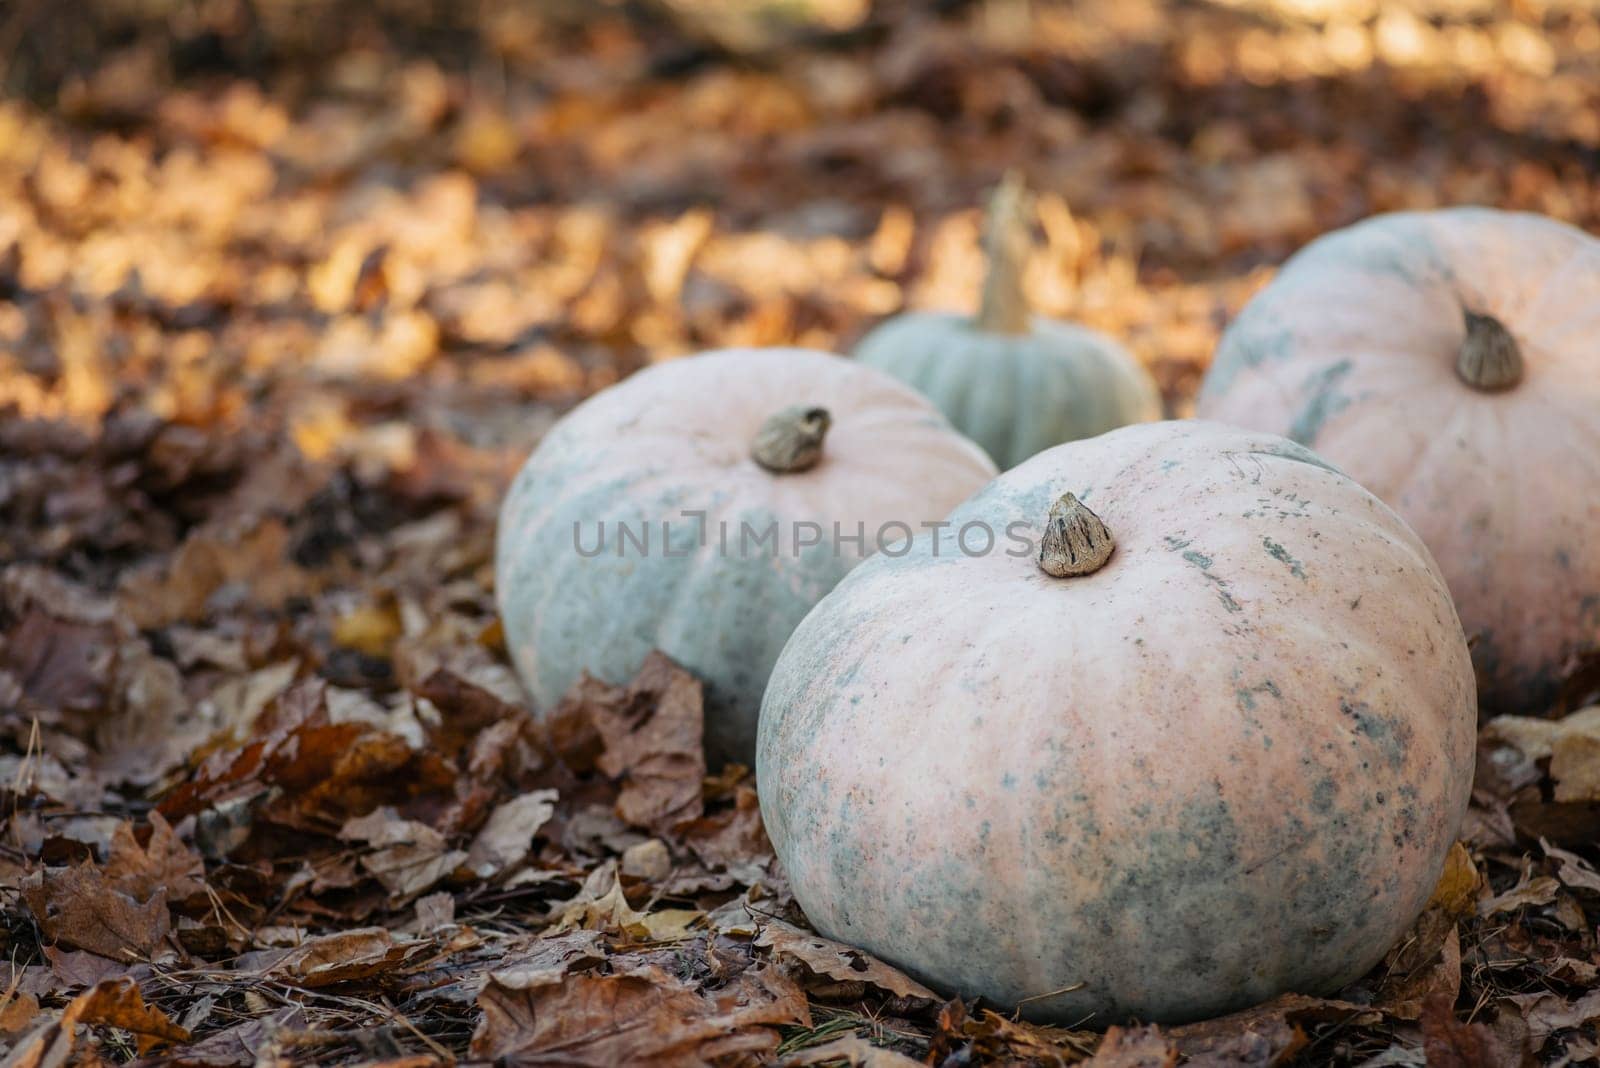 Autumn atmosphere, harvested pumpkins on yellow leaves